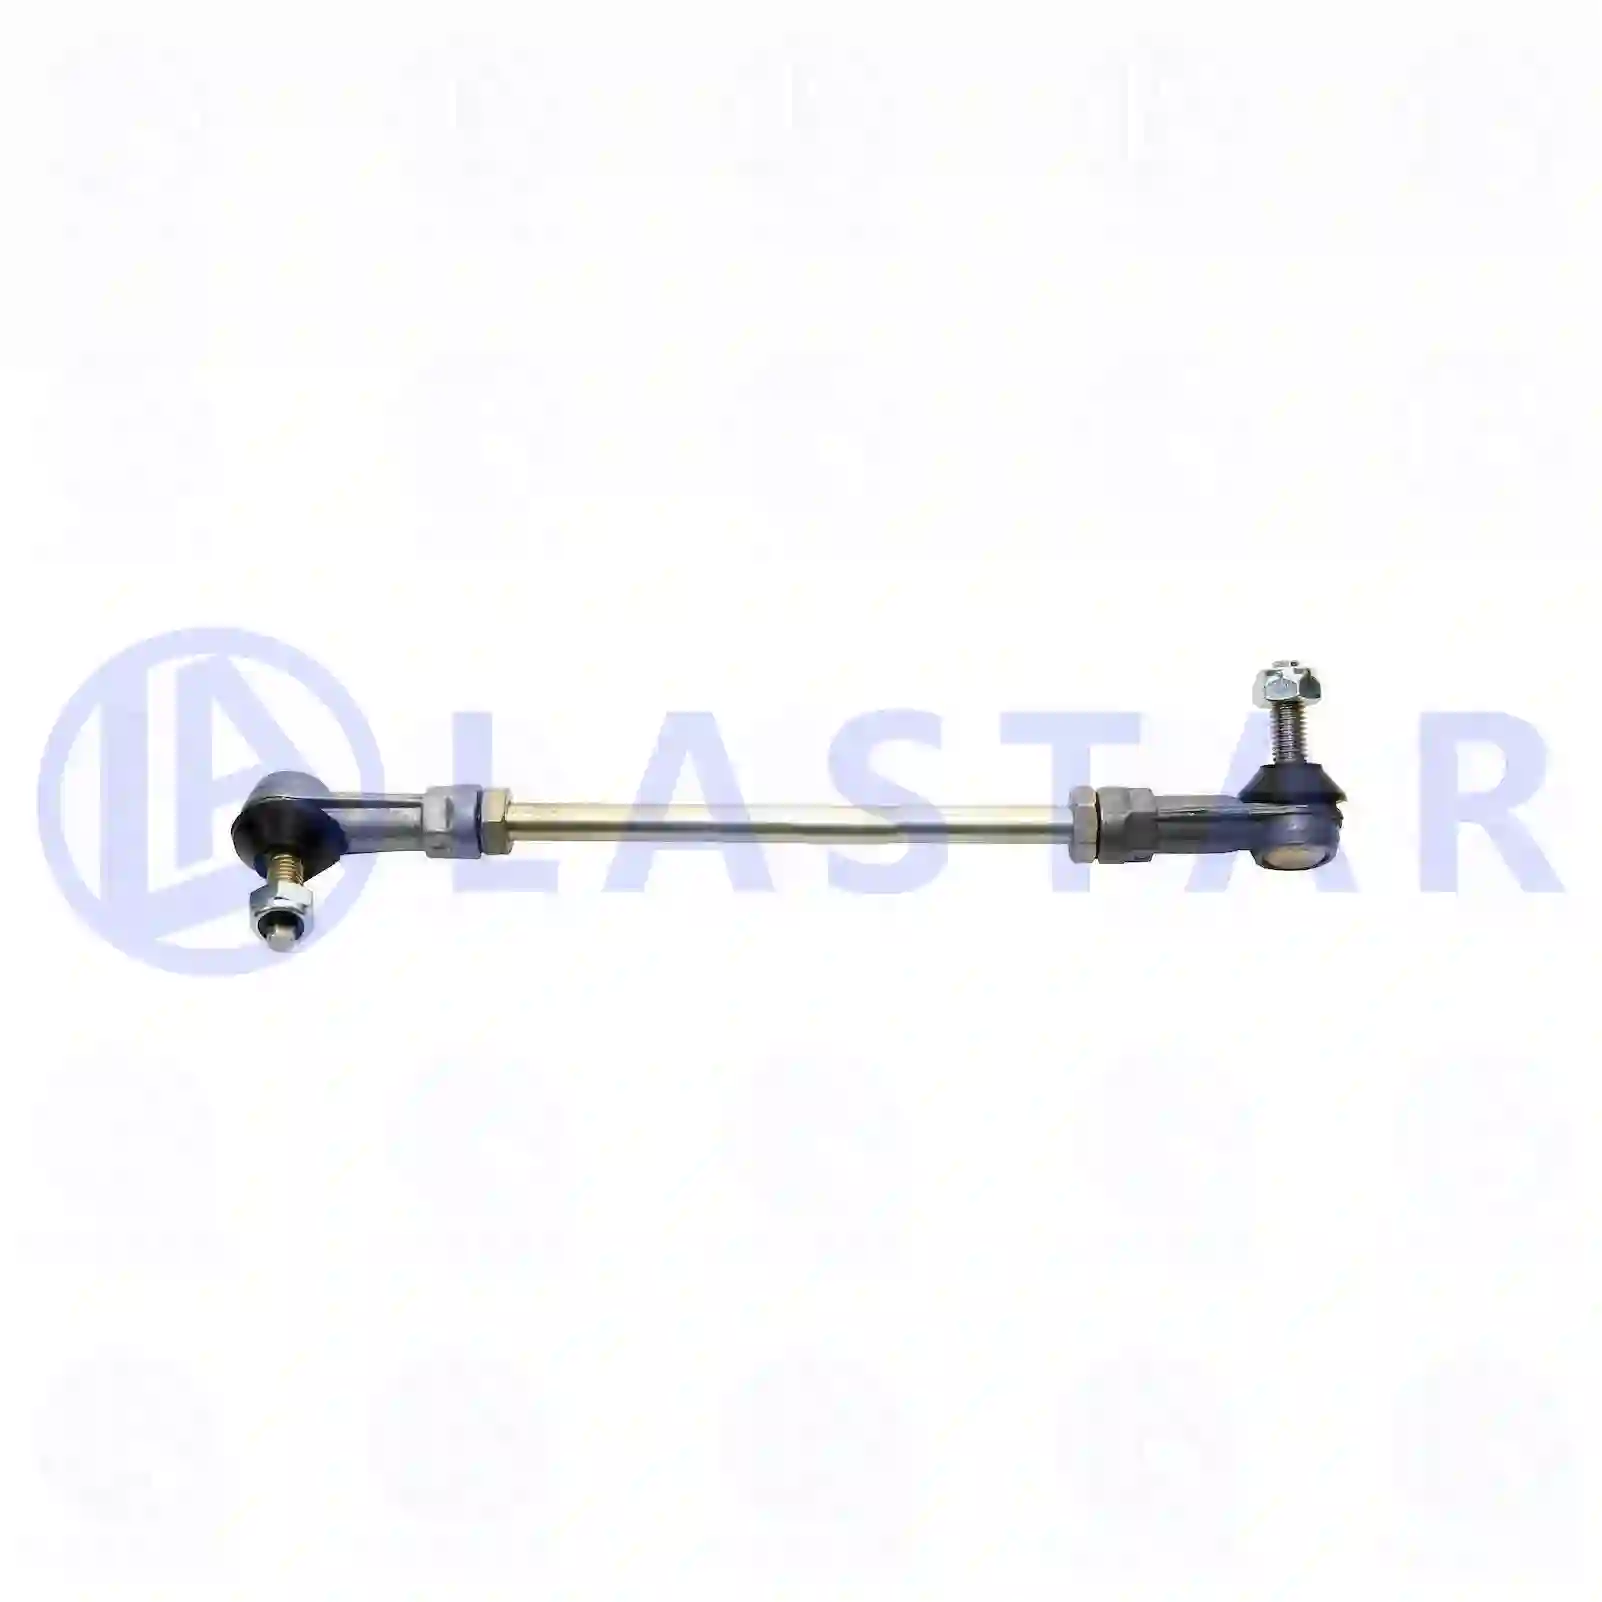 Pull rod, complete, 77731634, 1384896, 1437727, 327637, 371448, ZG30572-0008 ||  77731634 Lastar Spare Part | Truck Spare Parts, Auotomotive Spare Parts Pull rod, complete, 77731634, 1384896, 1437727, 327637, 371448, ZG30572-0008 ||  77731634 Lastar Spare Part | Truck Spare Parts, Auotomotive Spare Parts